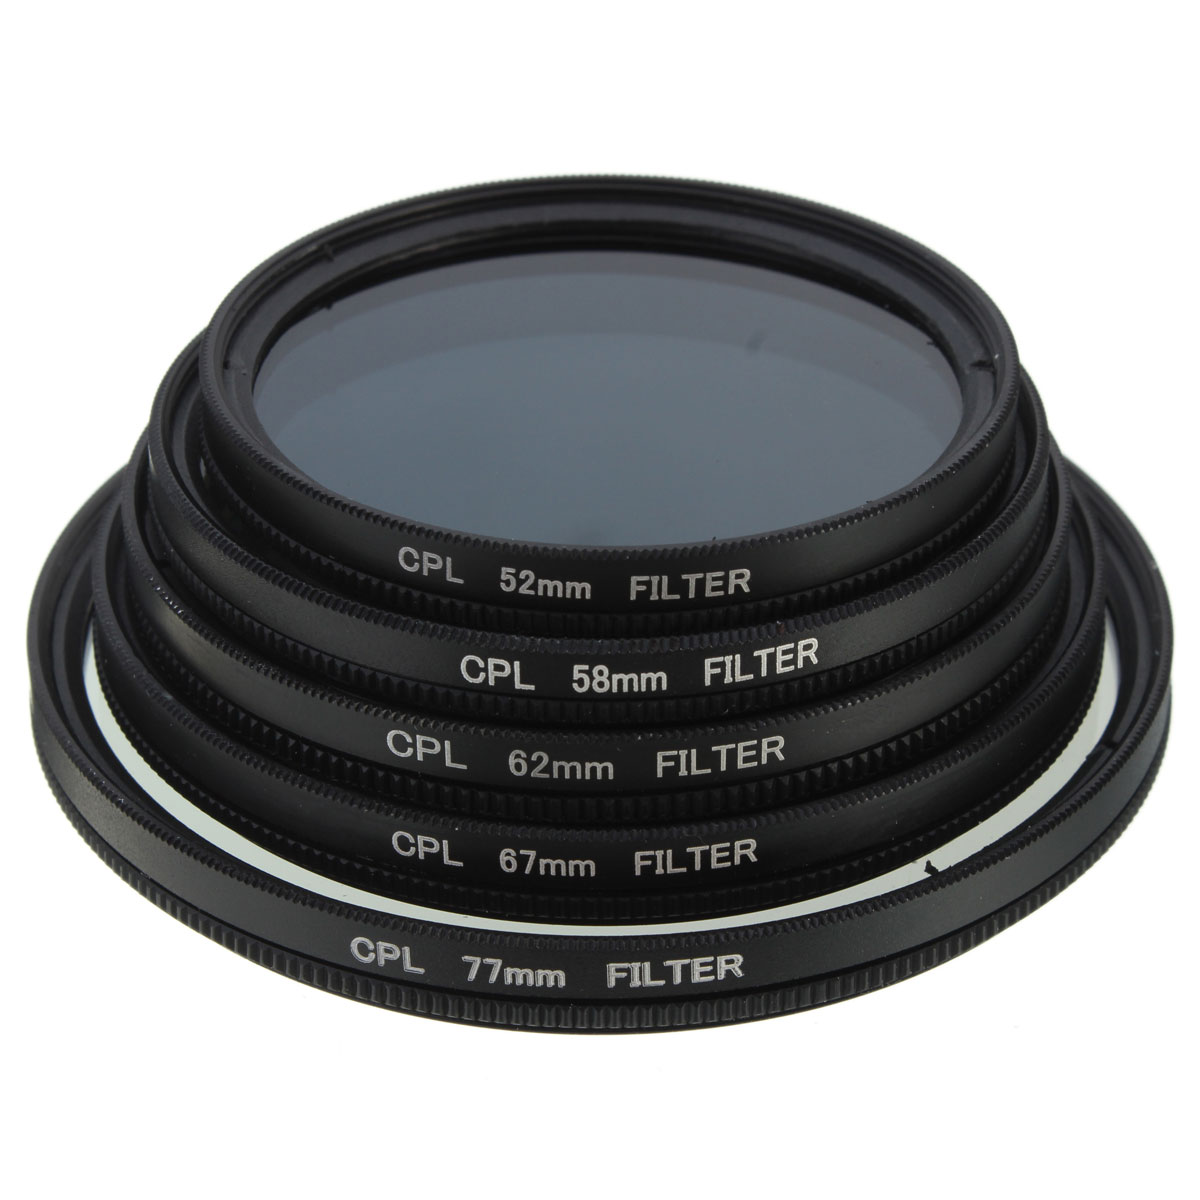 nikon lens filters effects